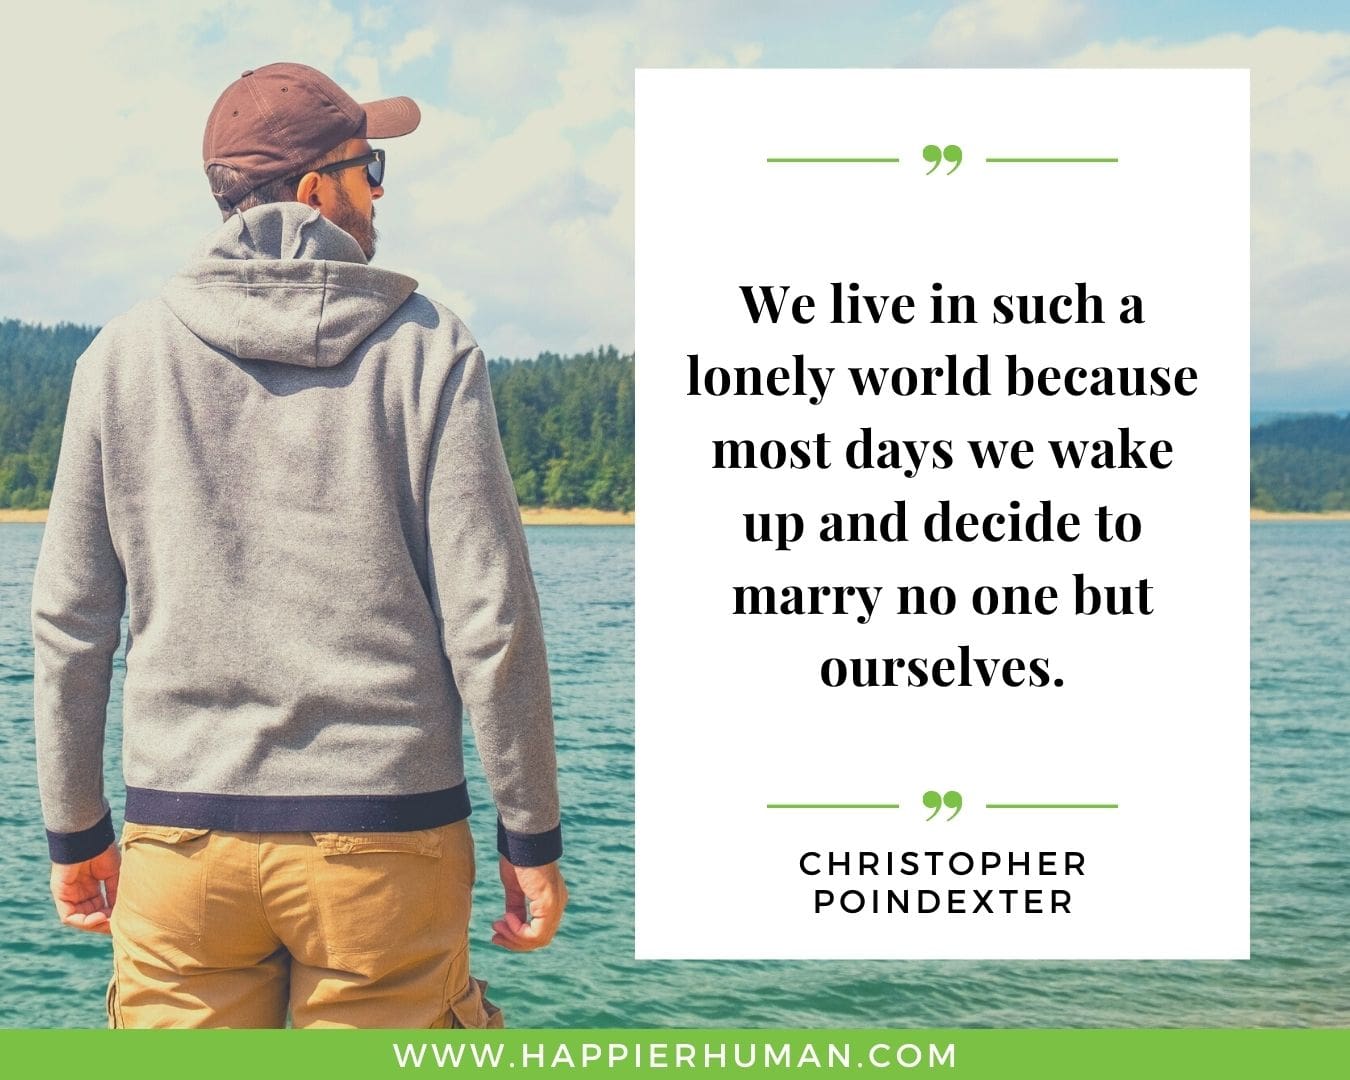 Loneliness Quotes - “We live in such a lonely world because most days we wake up and decide to marry no one but ourselves.”– Christopher Poindexter